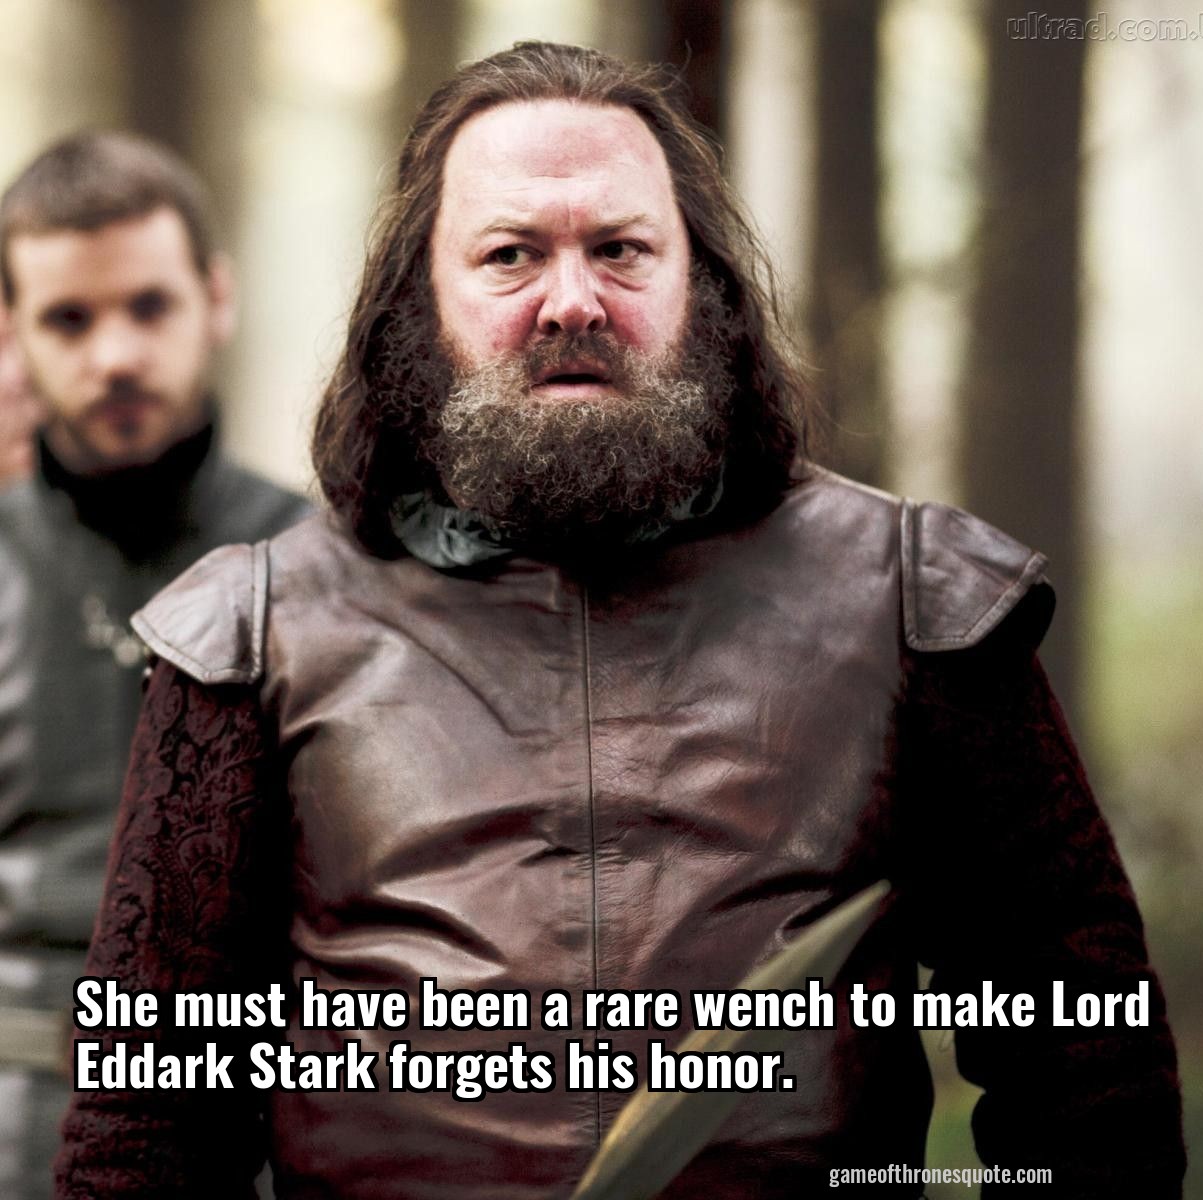 She must have been a rare wench to make Lord Eddark Stark forgets his honor.